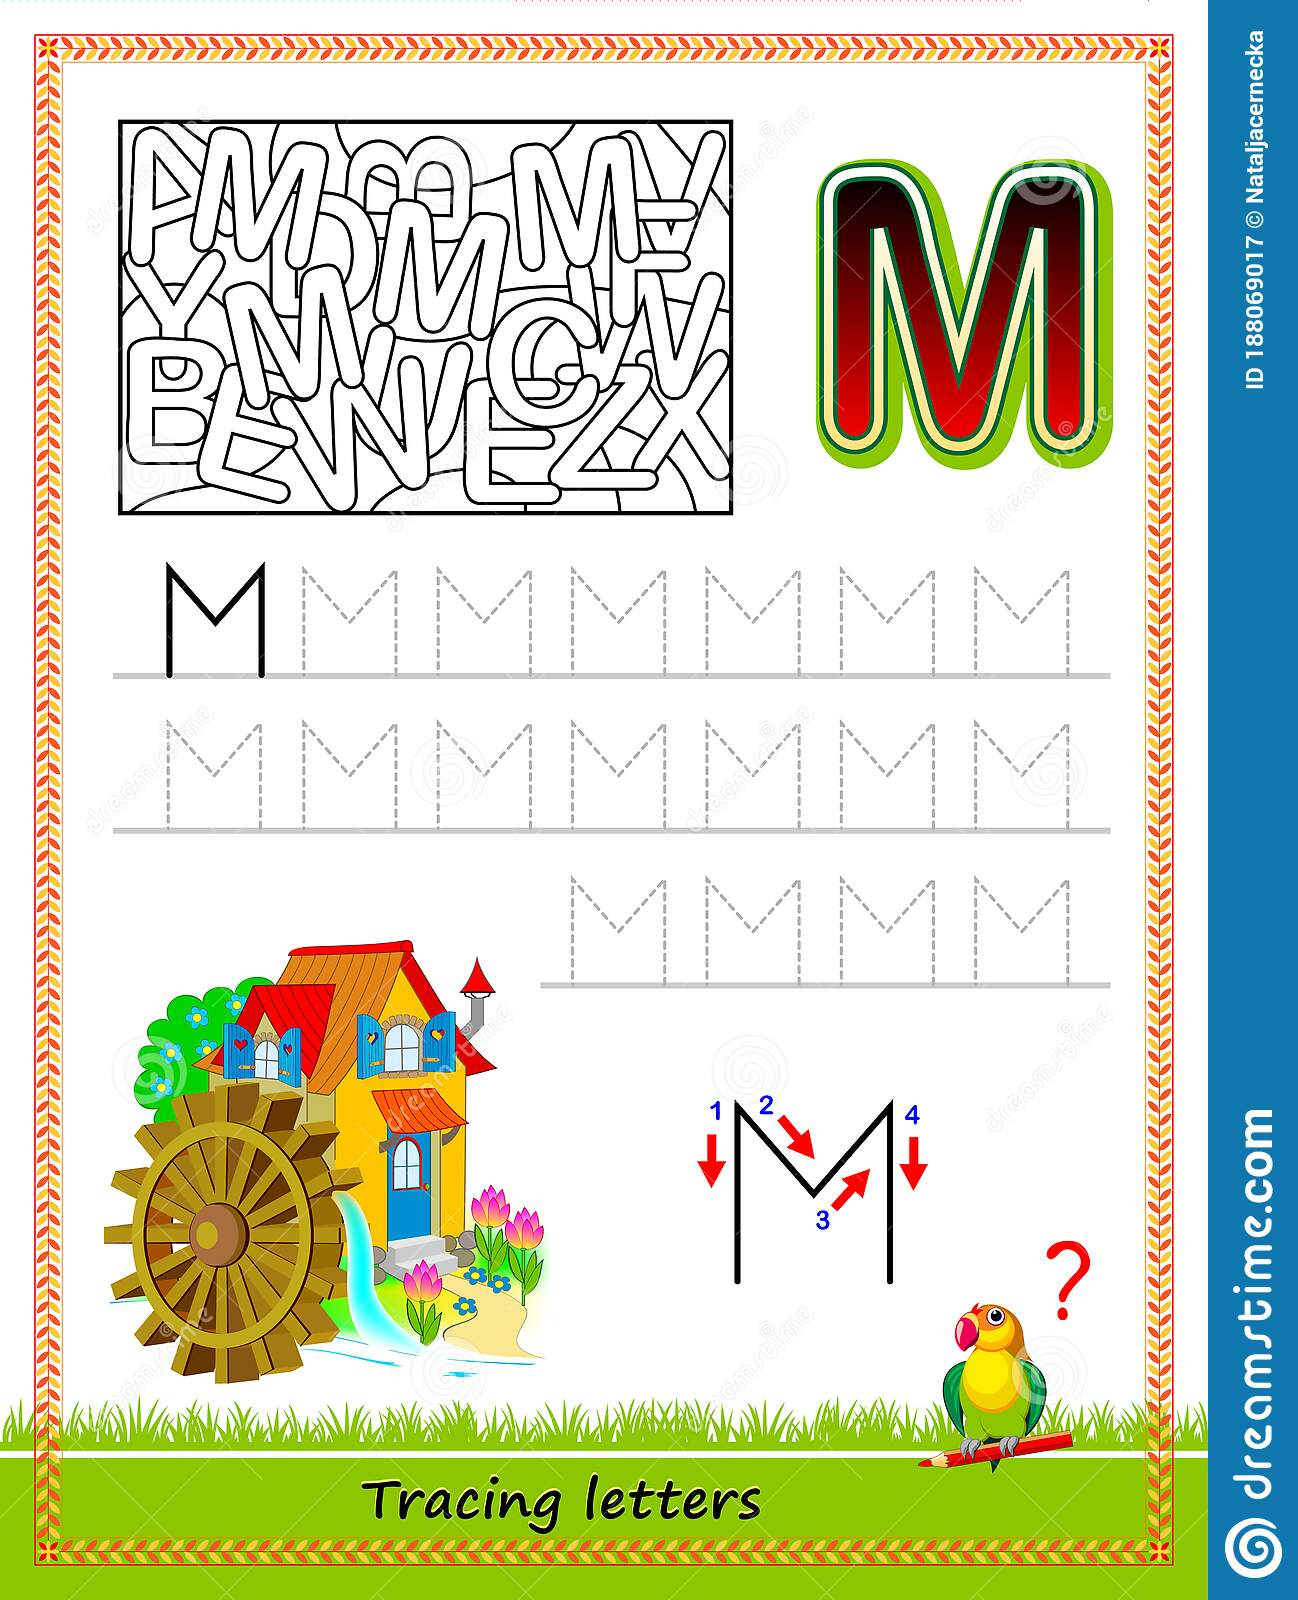 Worksheet For Tracing Letters. Find And Paint All Letters M